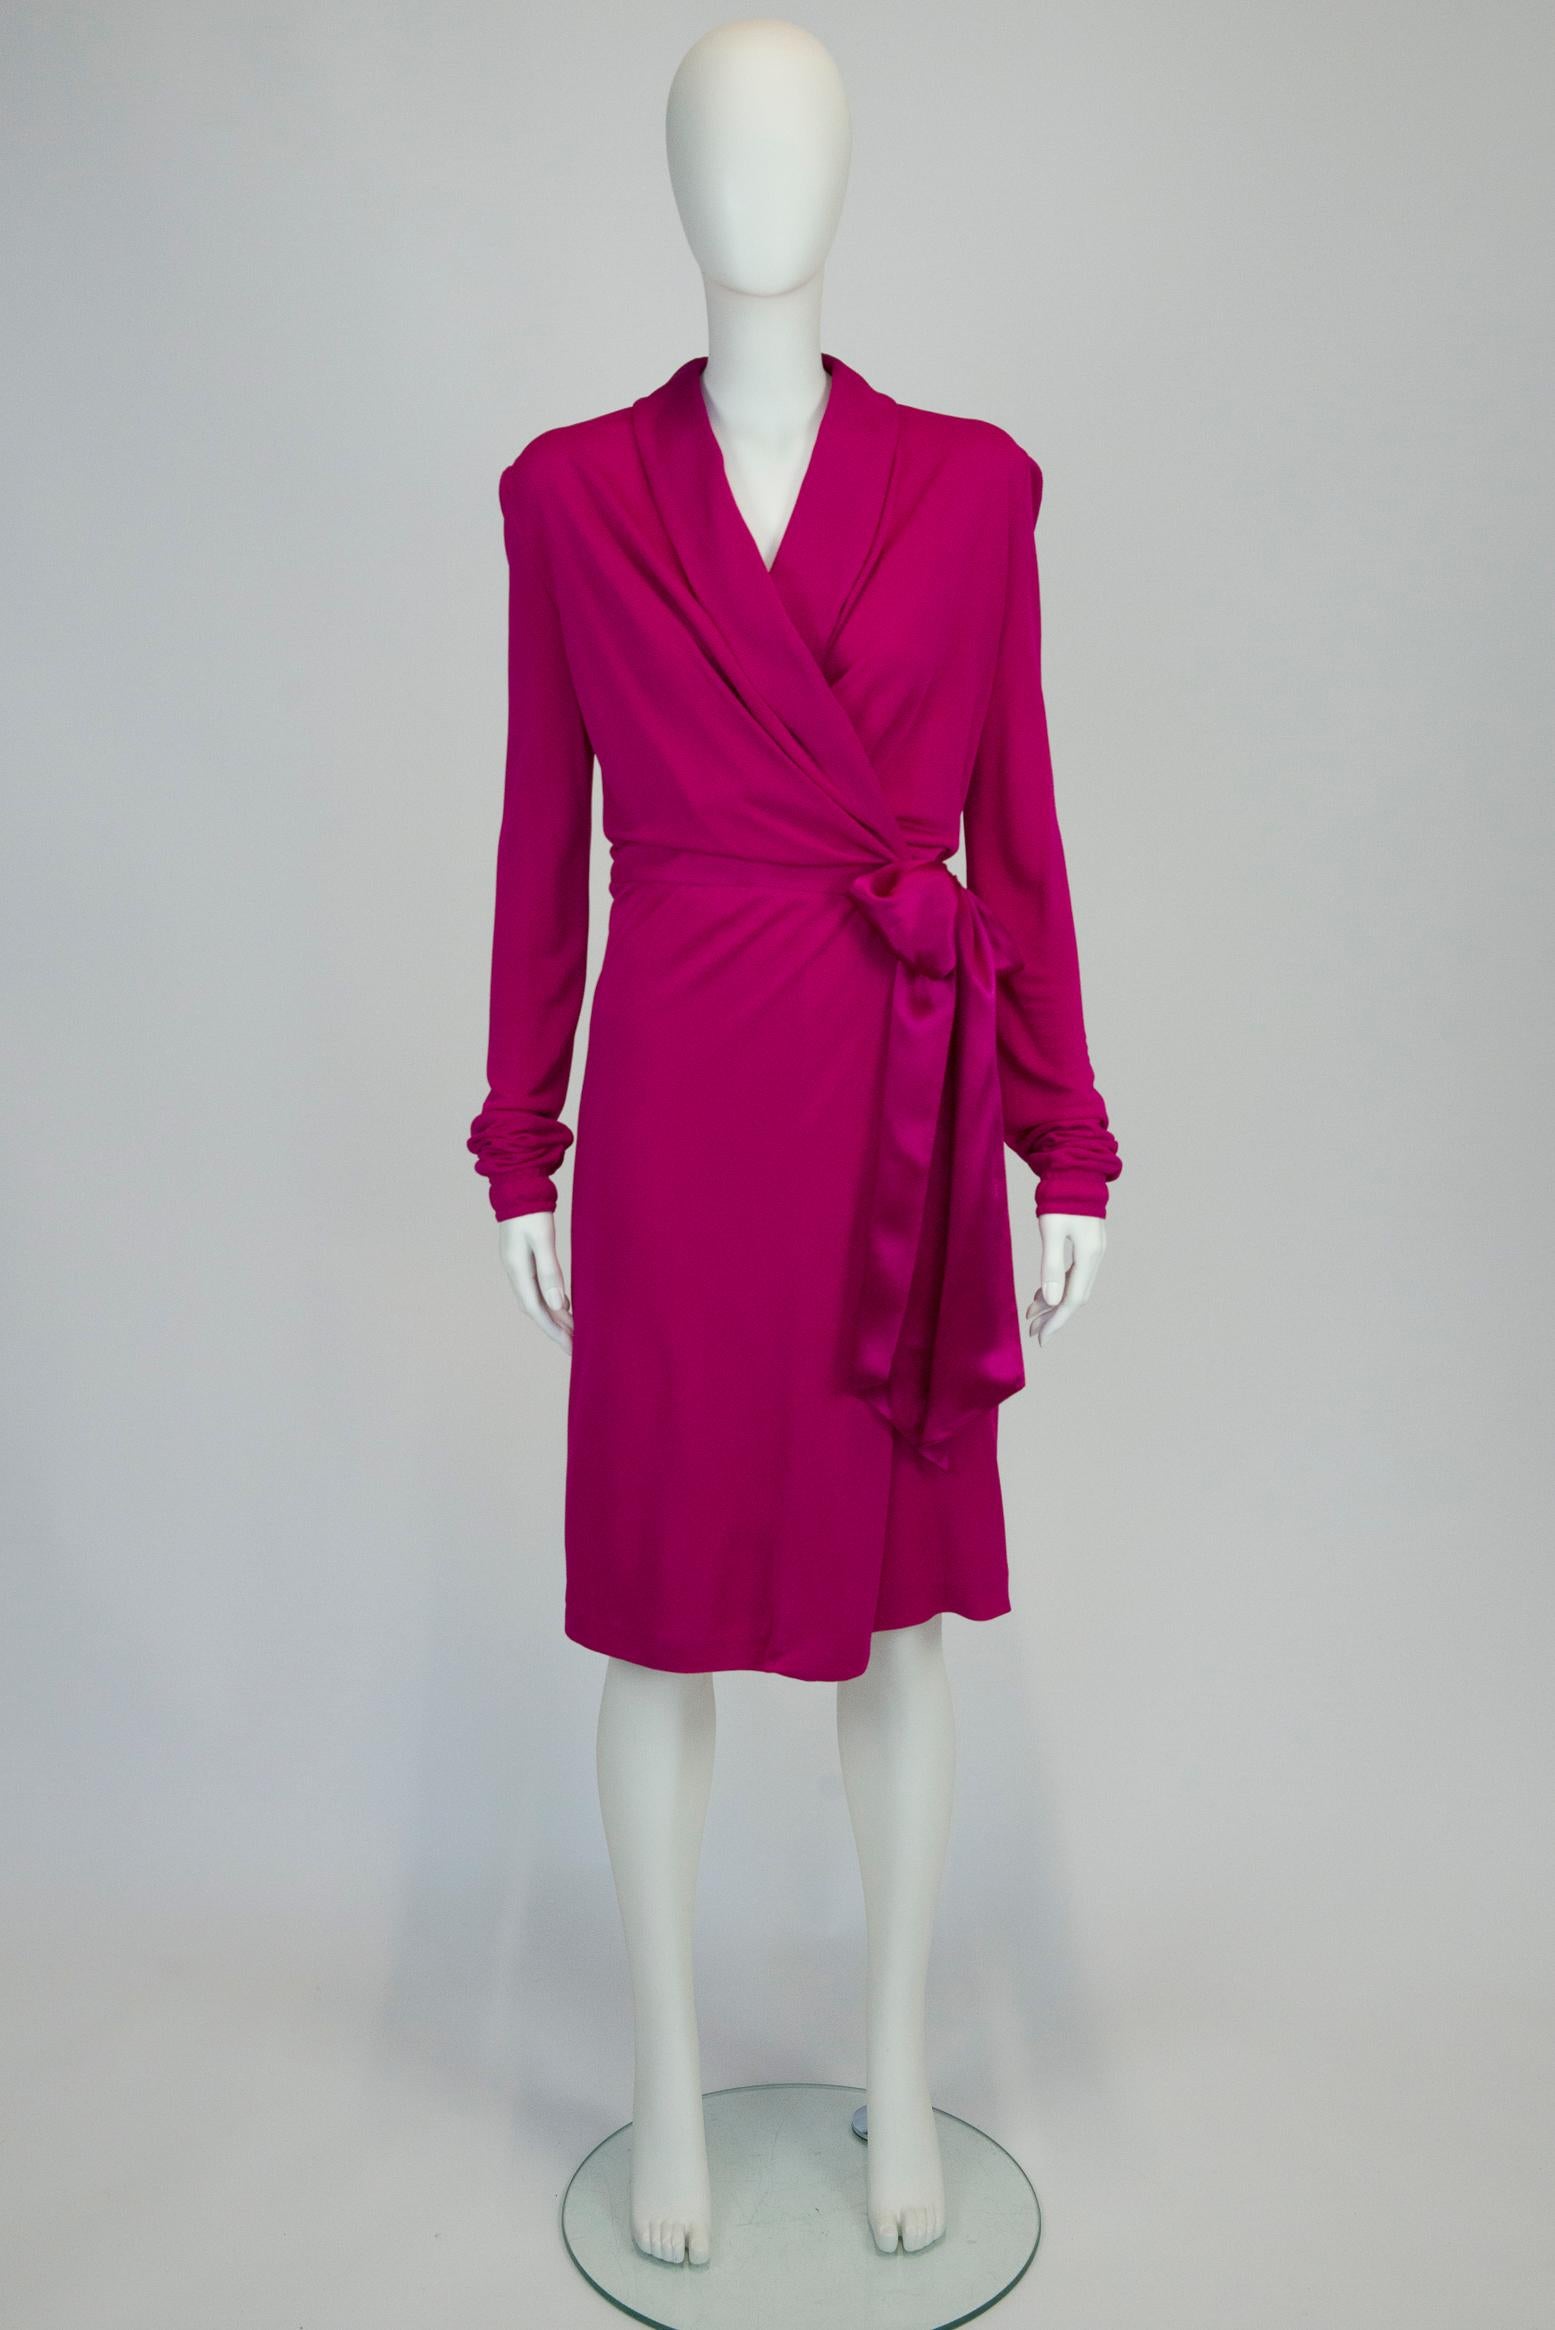 Effortlessly chic, this early 2000 Yves Saint Laurent by Tom Ford wrap dress will deliver glamour and sophistication for any occasion. Cut from comfortable vibrant fuchsia crepe-viscose, it has a plunging V-neckline and satin-silk waist sash ties to